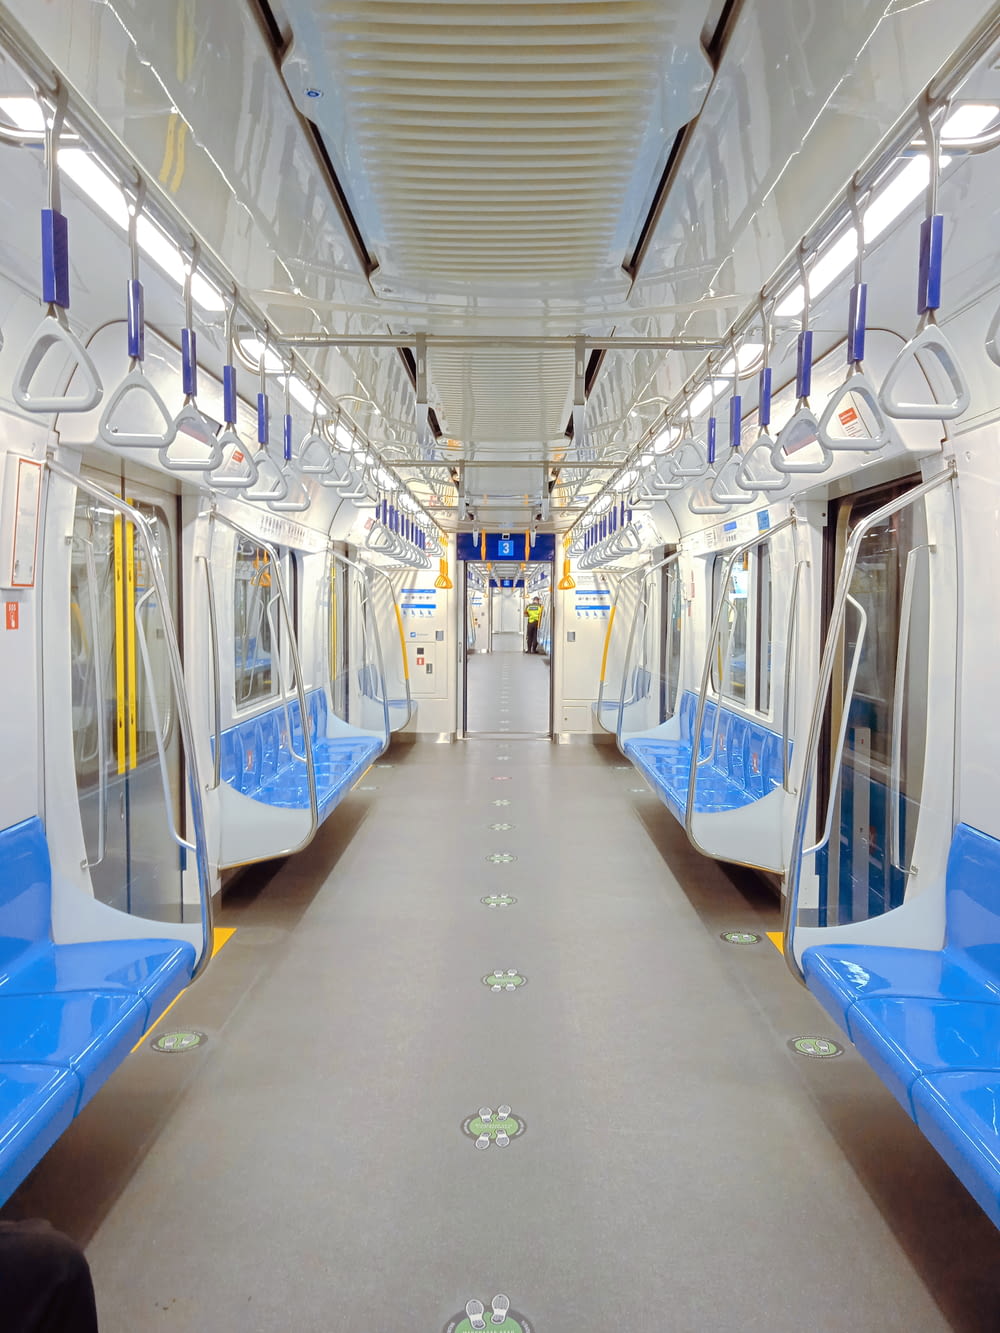 a subway car with blue and white seats